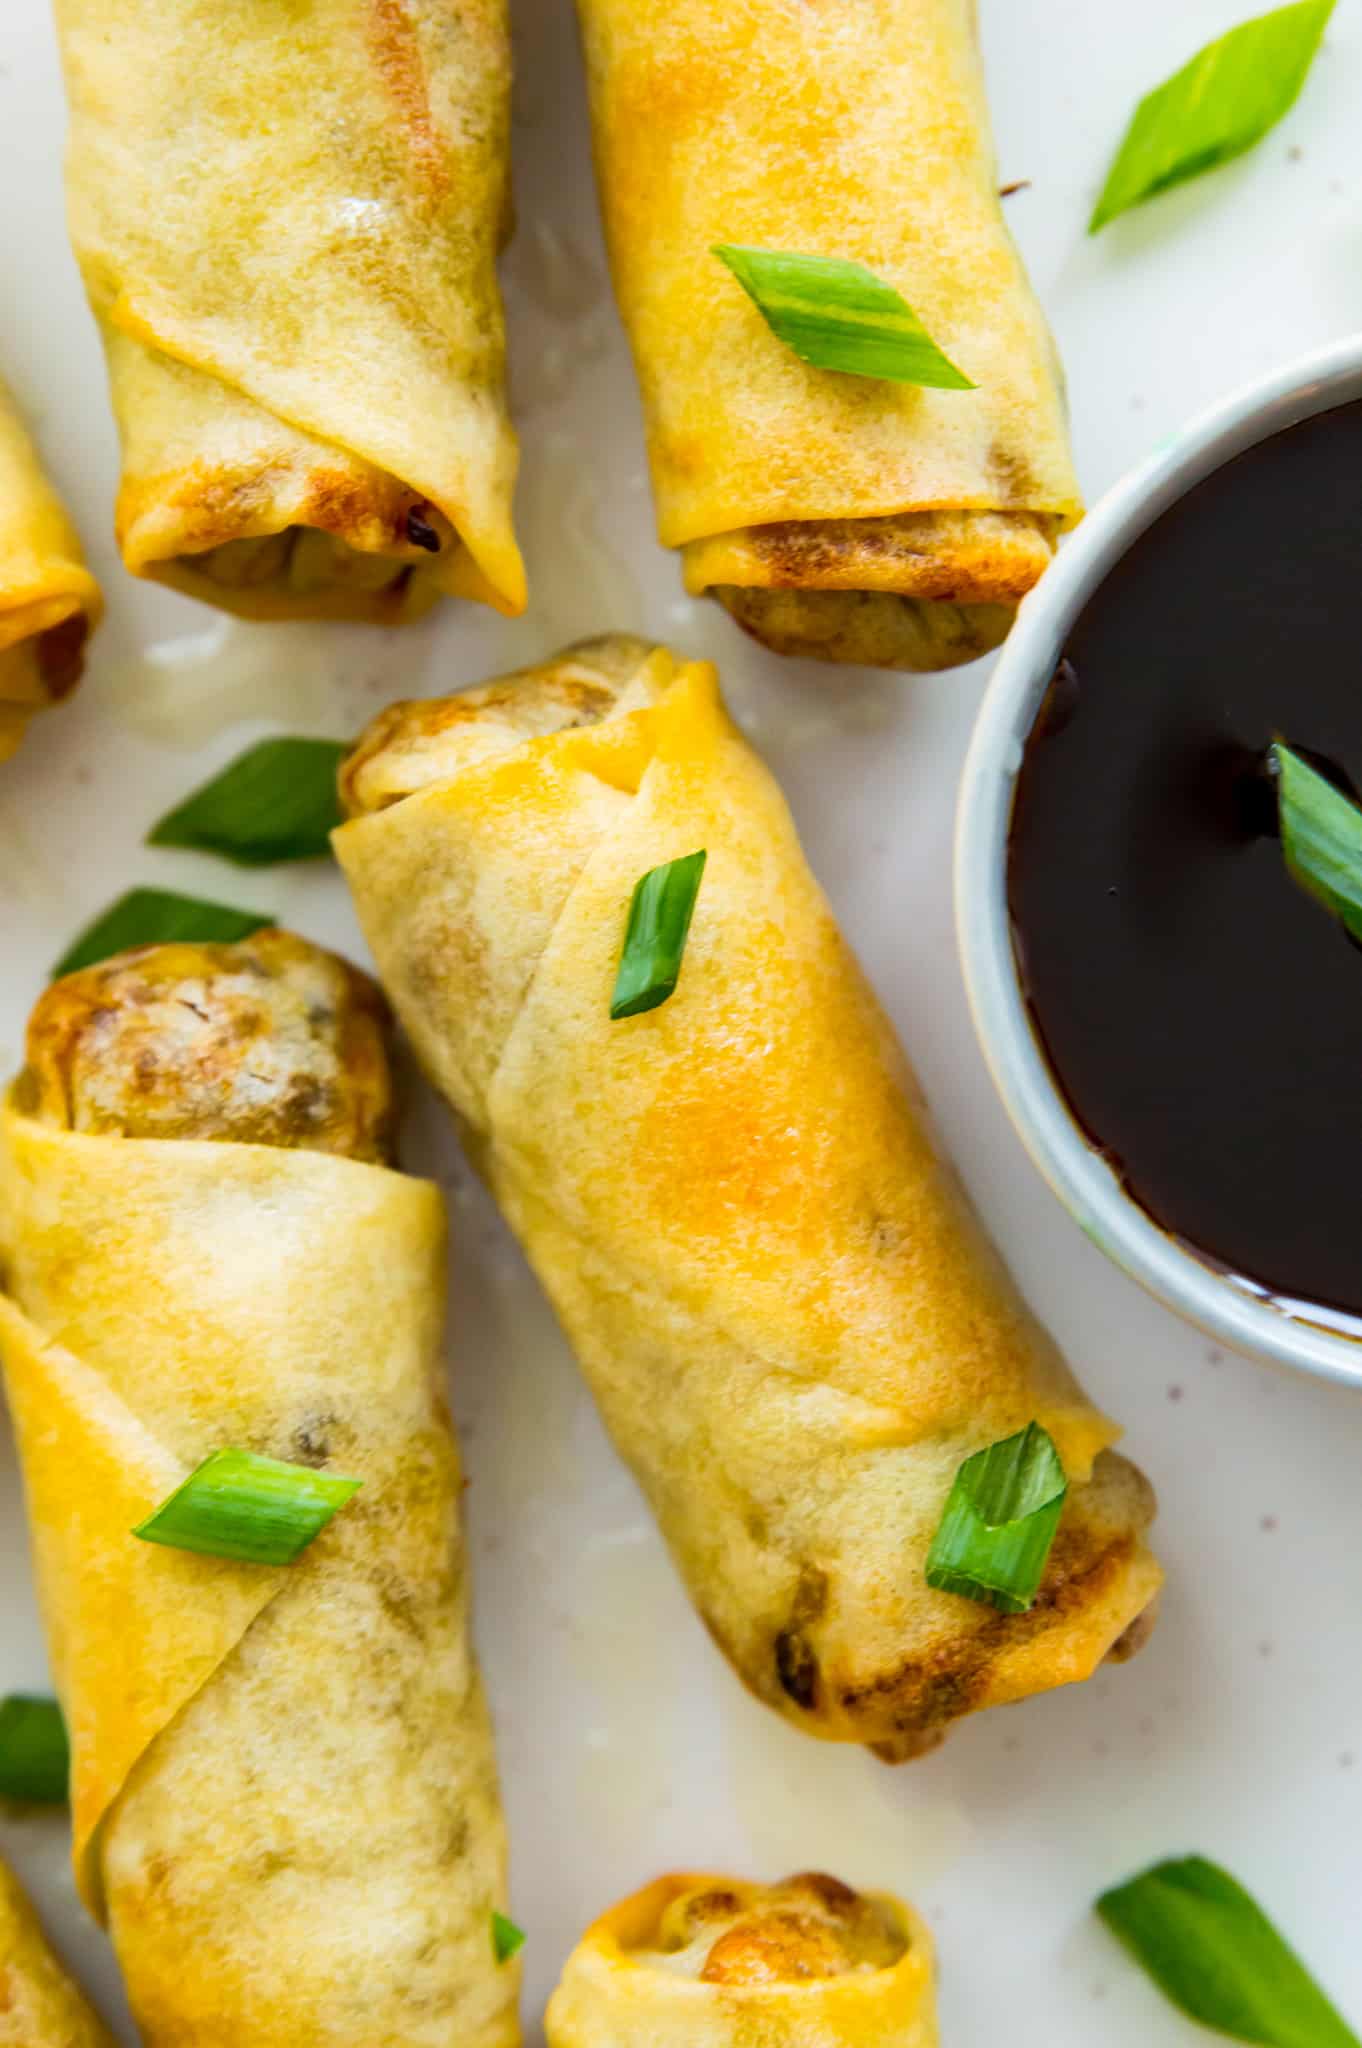 Egg rolls on a plate with a dish of soy sauce and garnished with green onion.